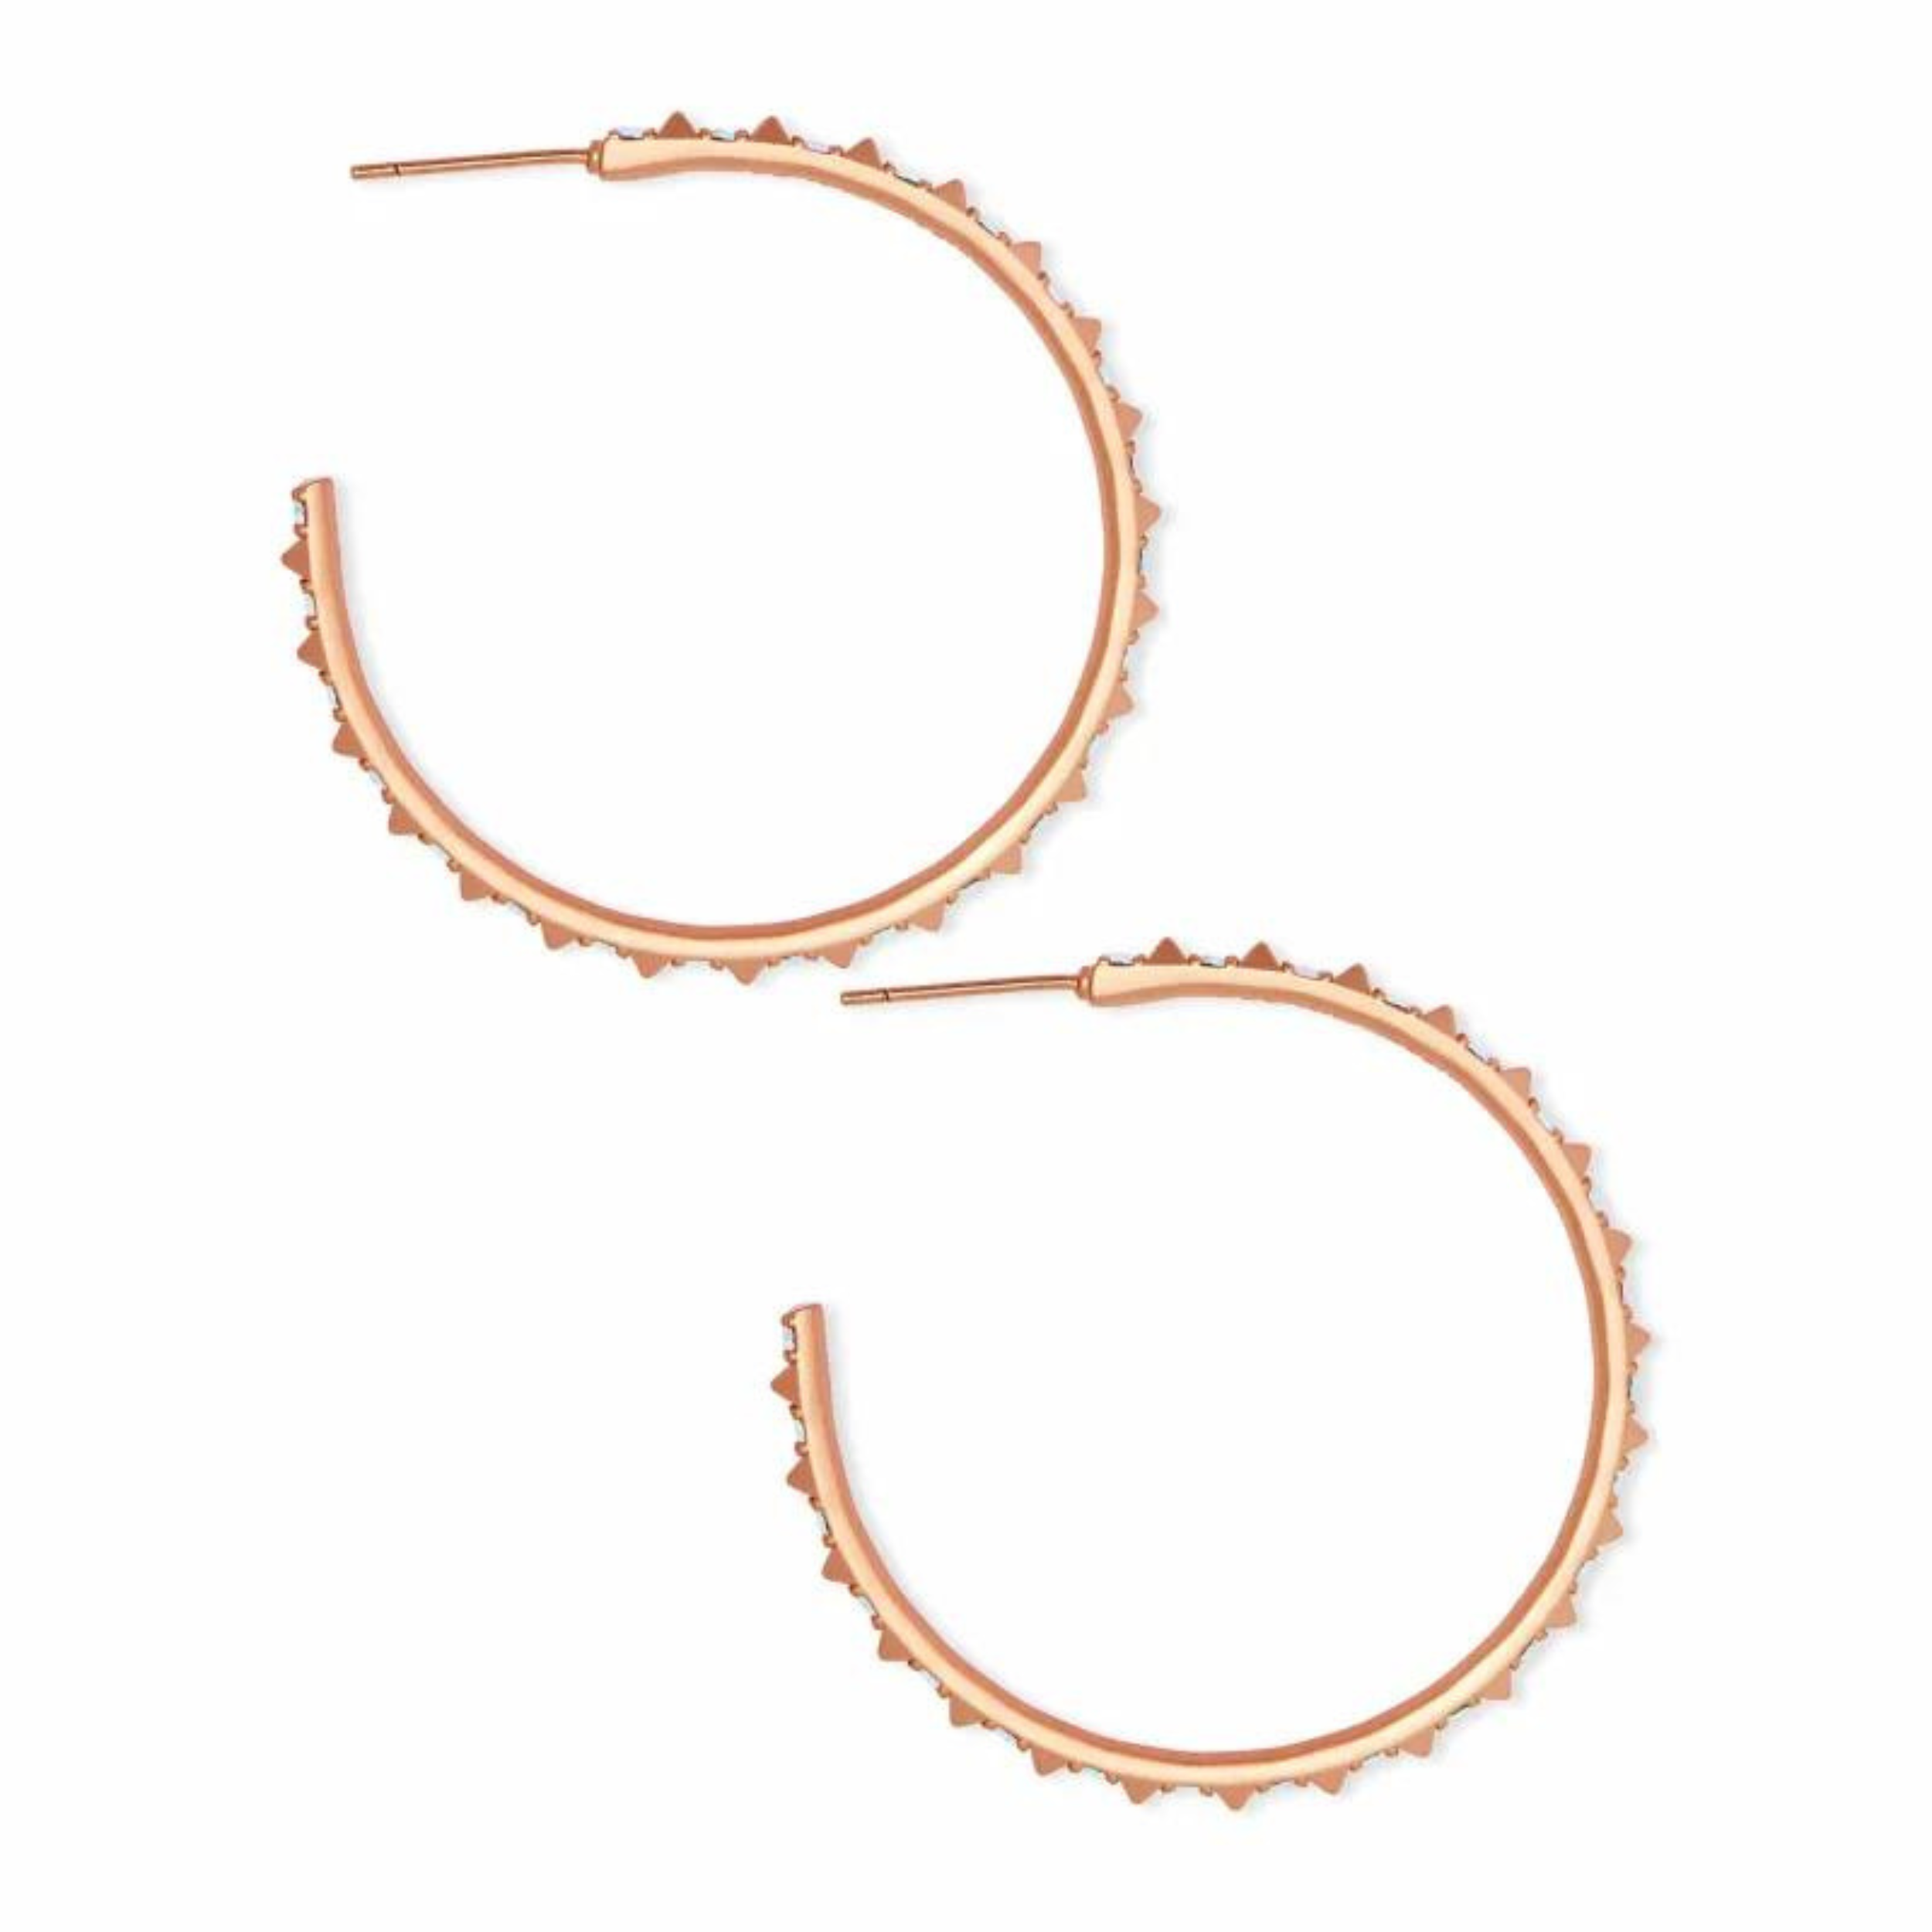 Kendra Scott | Veronica Hoop Earrings in Rose Gold - Giddy Up Glamour Boutique